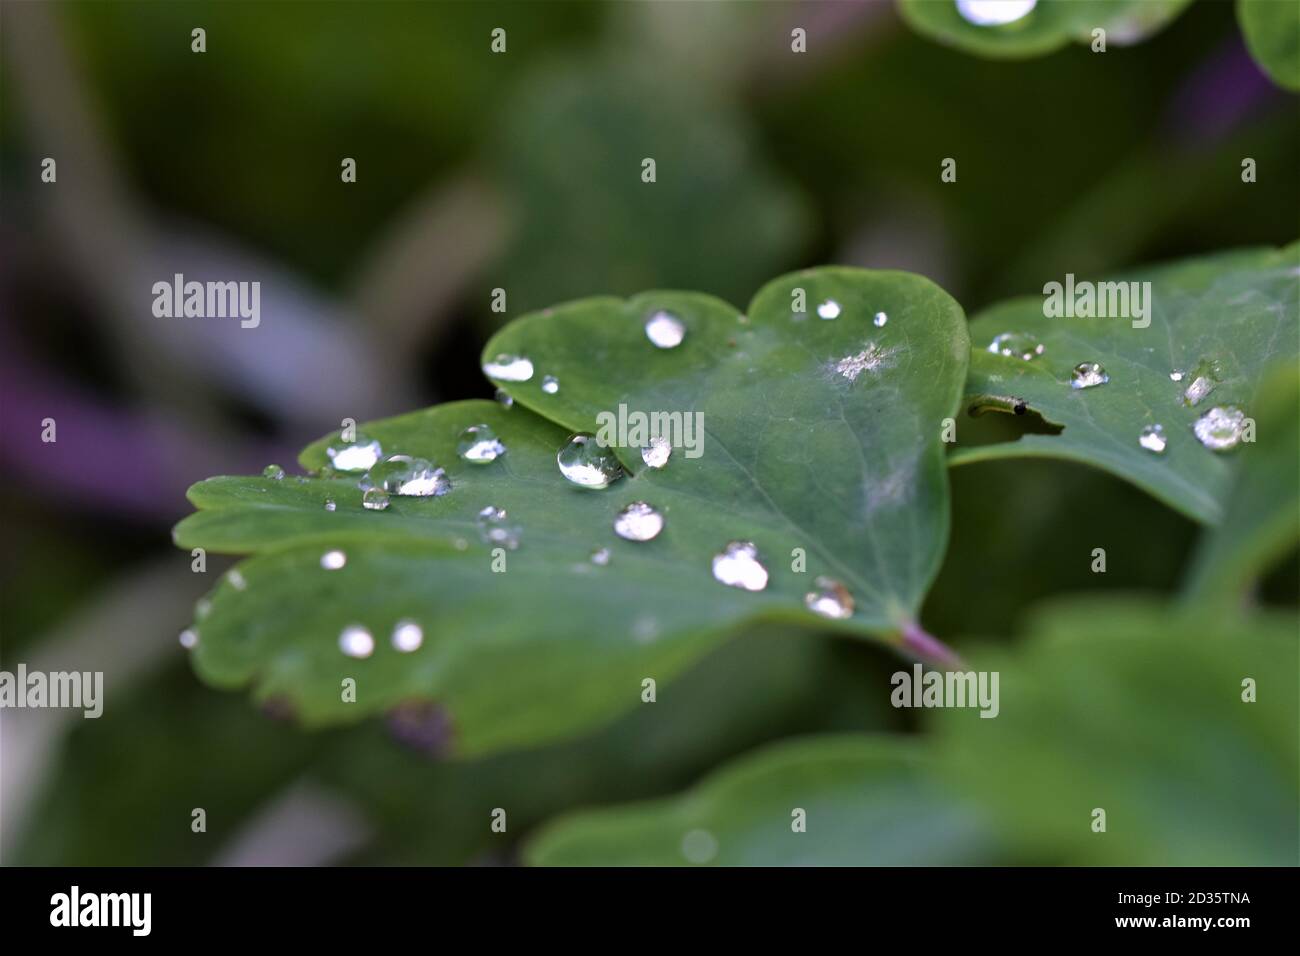 Dew drops on green leaf as close up Stock Photo